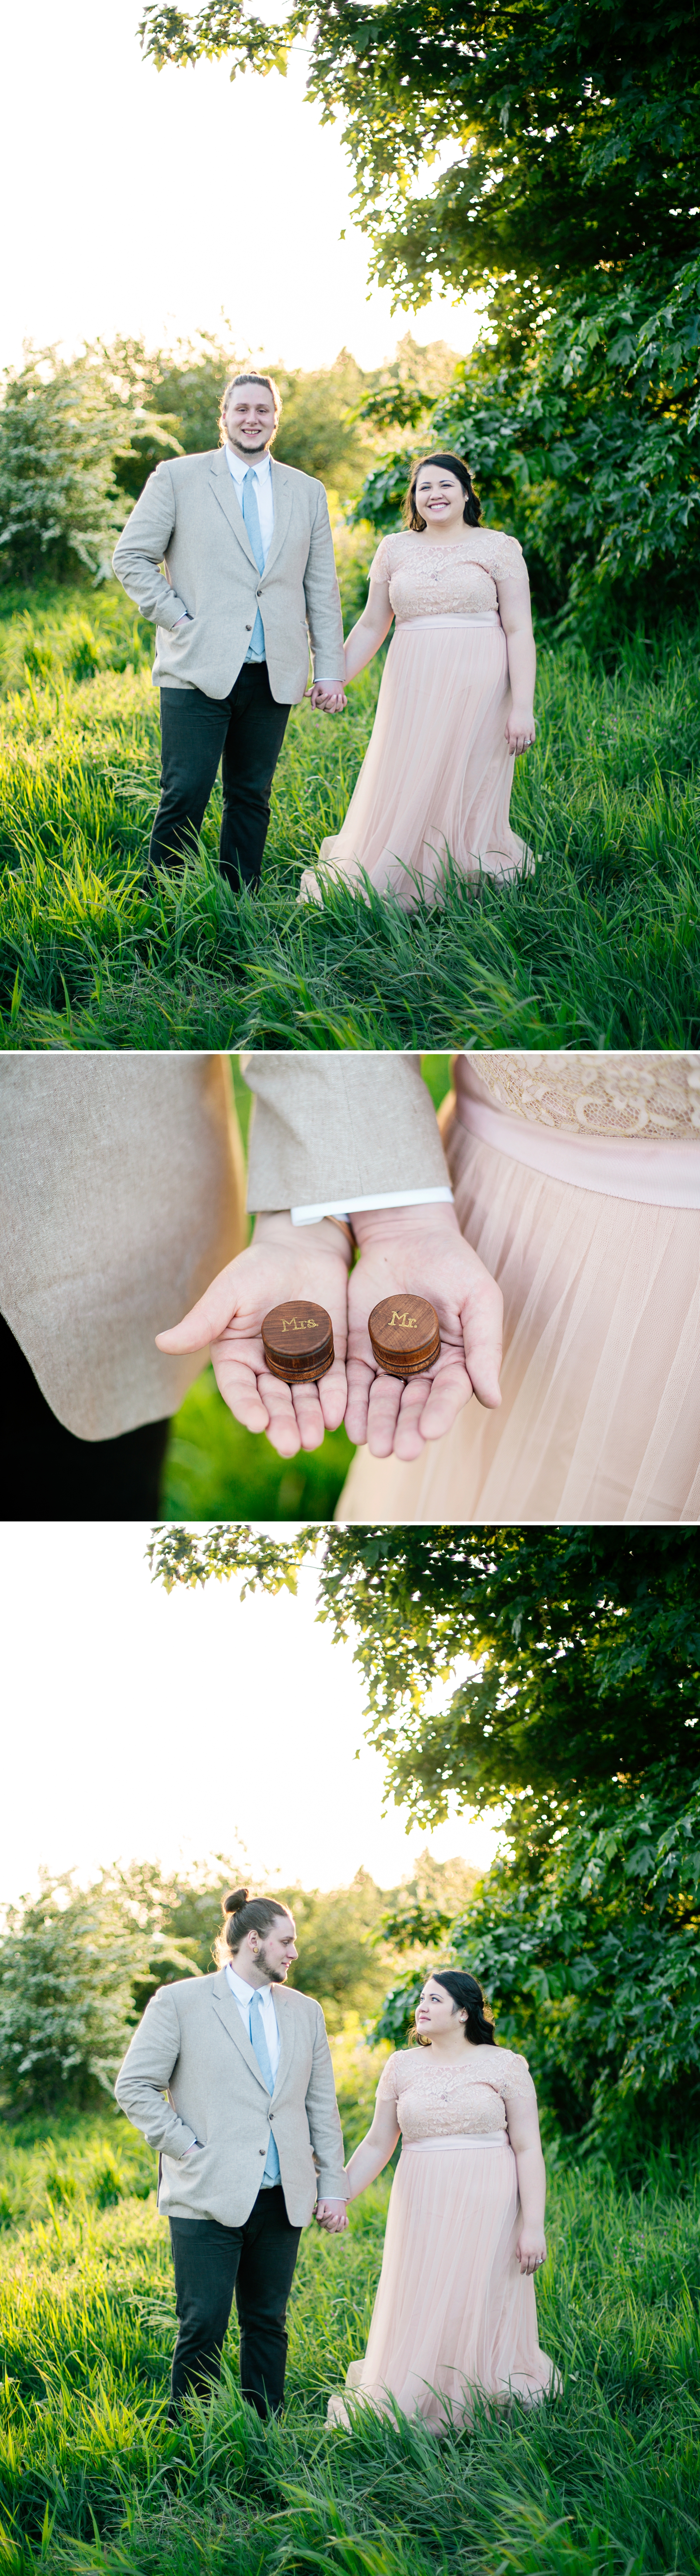 31-Bride-Groom-Elopement-Discovery-Park-Rustic-Meadow-Open-Field-Seattle-Sunset-Photographer-Wedding-Photography-by-Betty-Elaine-Blush-BHLDN-Wedding-Gown-Dress-Mr-Mrs-Ring-Box